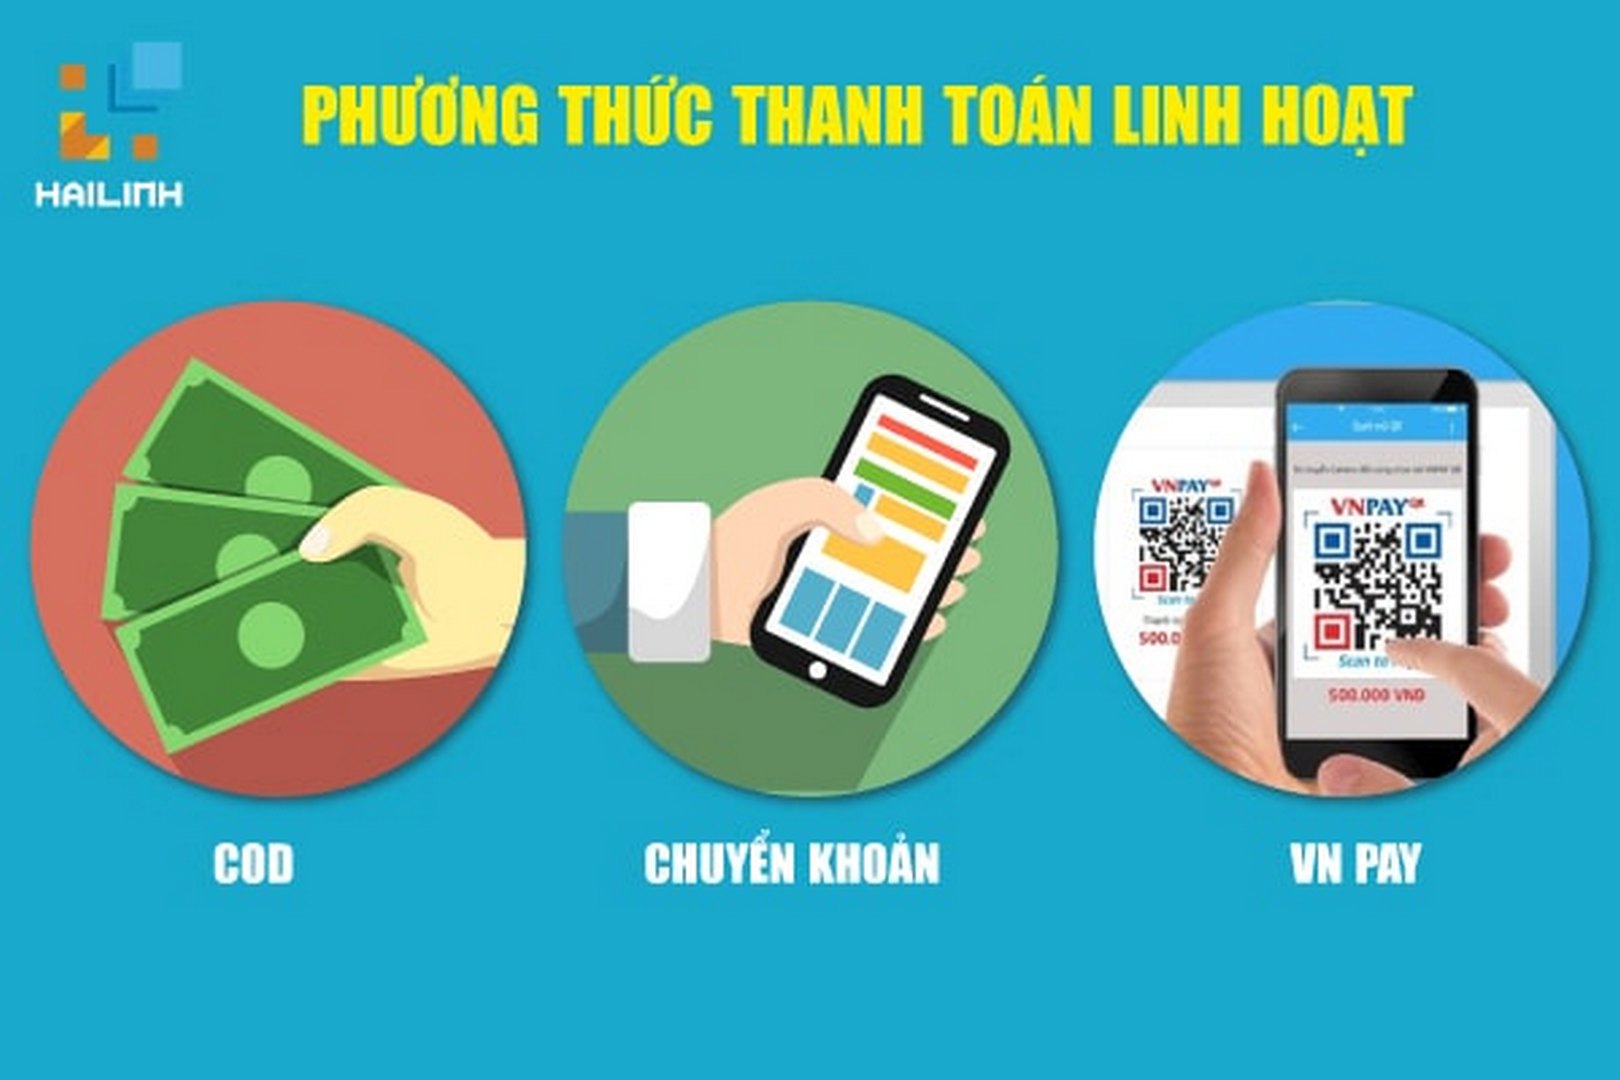 thanh toan linh hoat